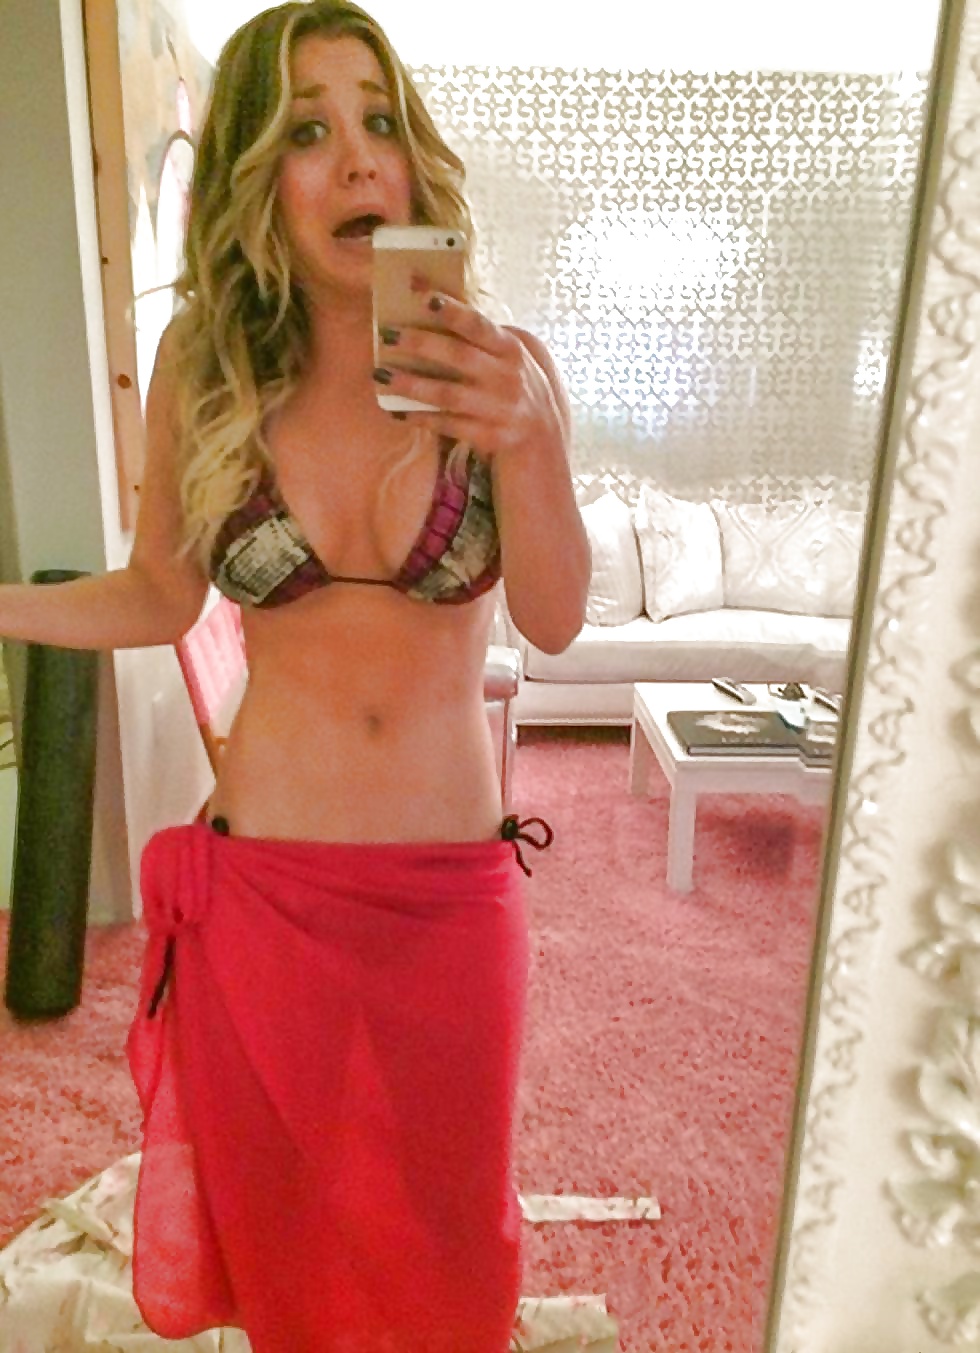 Kaley Cuoco - Leaked Pictures - 31.08.2014 #32752428